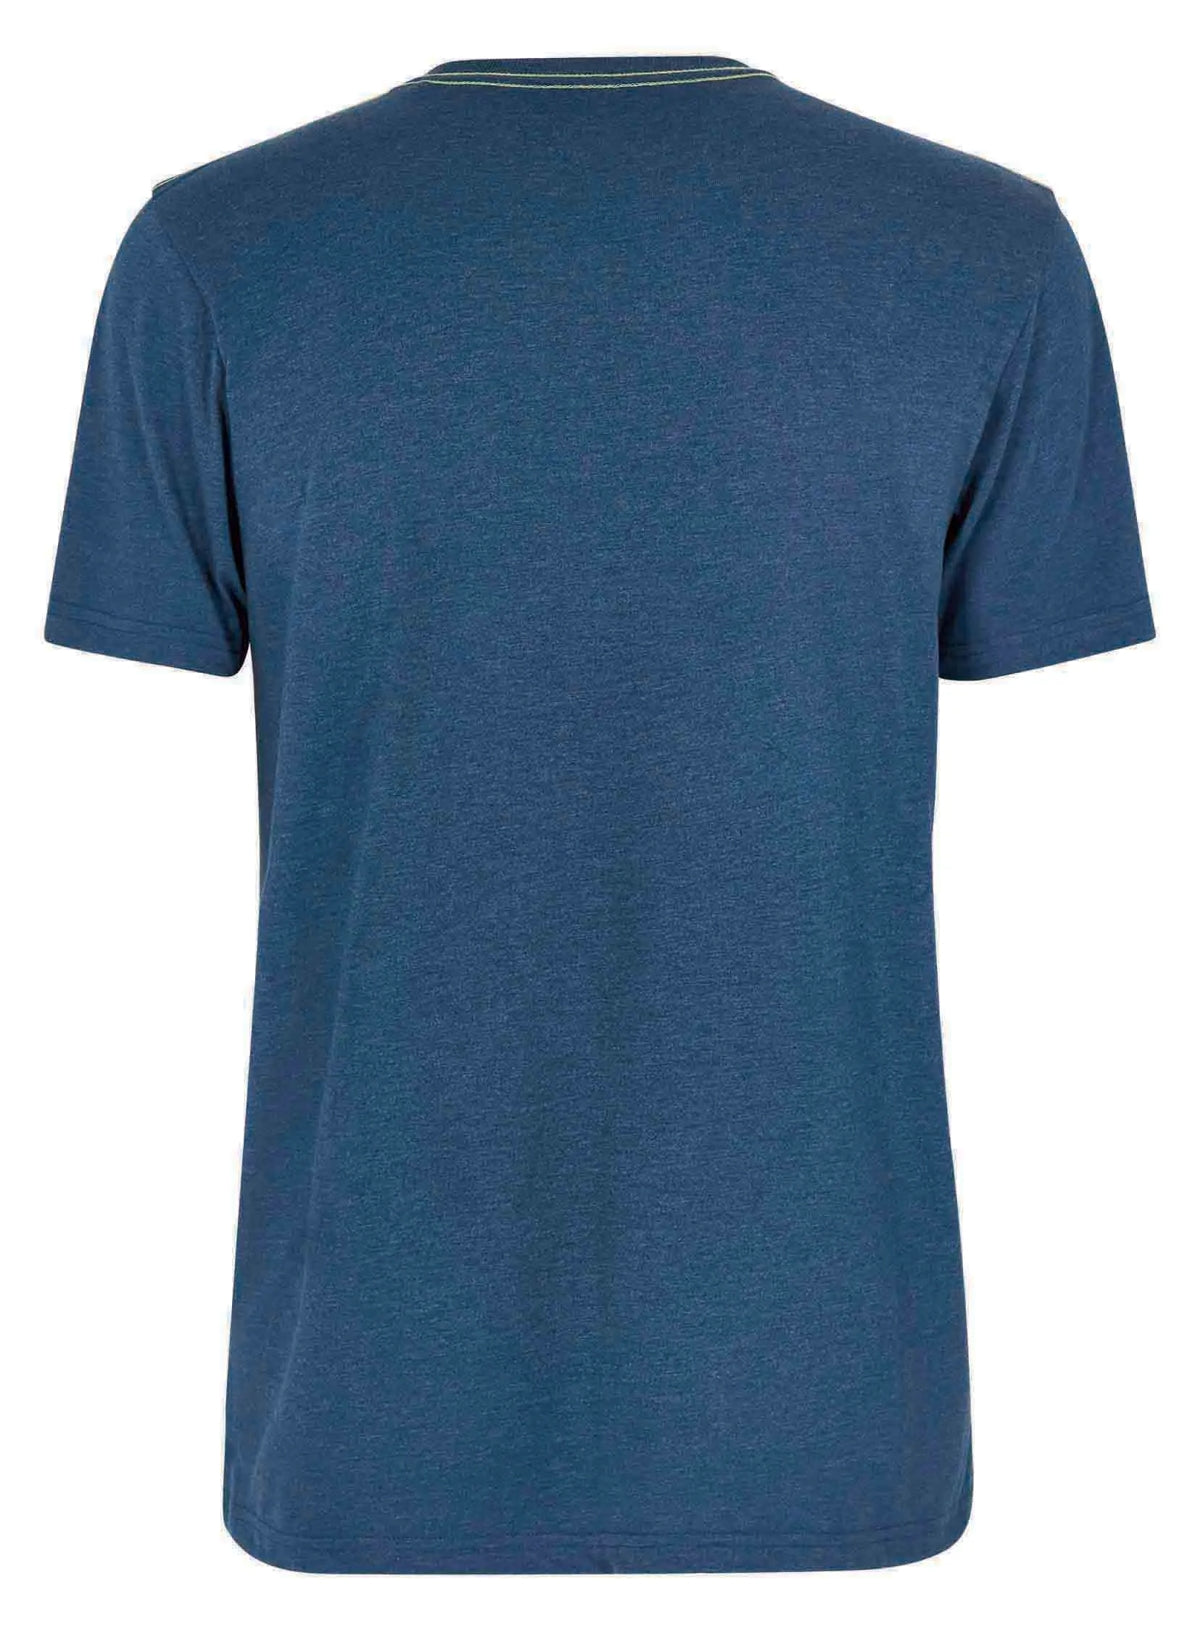 Weird Fish men's paddleboarder print tee in Ensign Blue with plain back and contrast stitching.